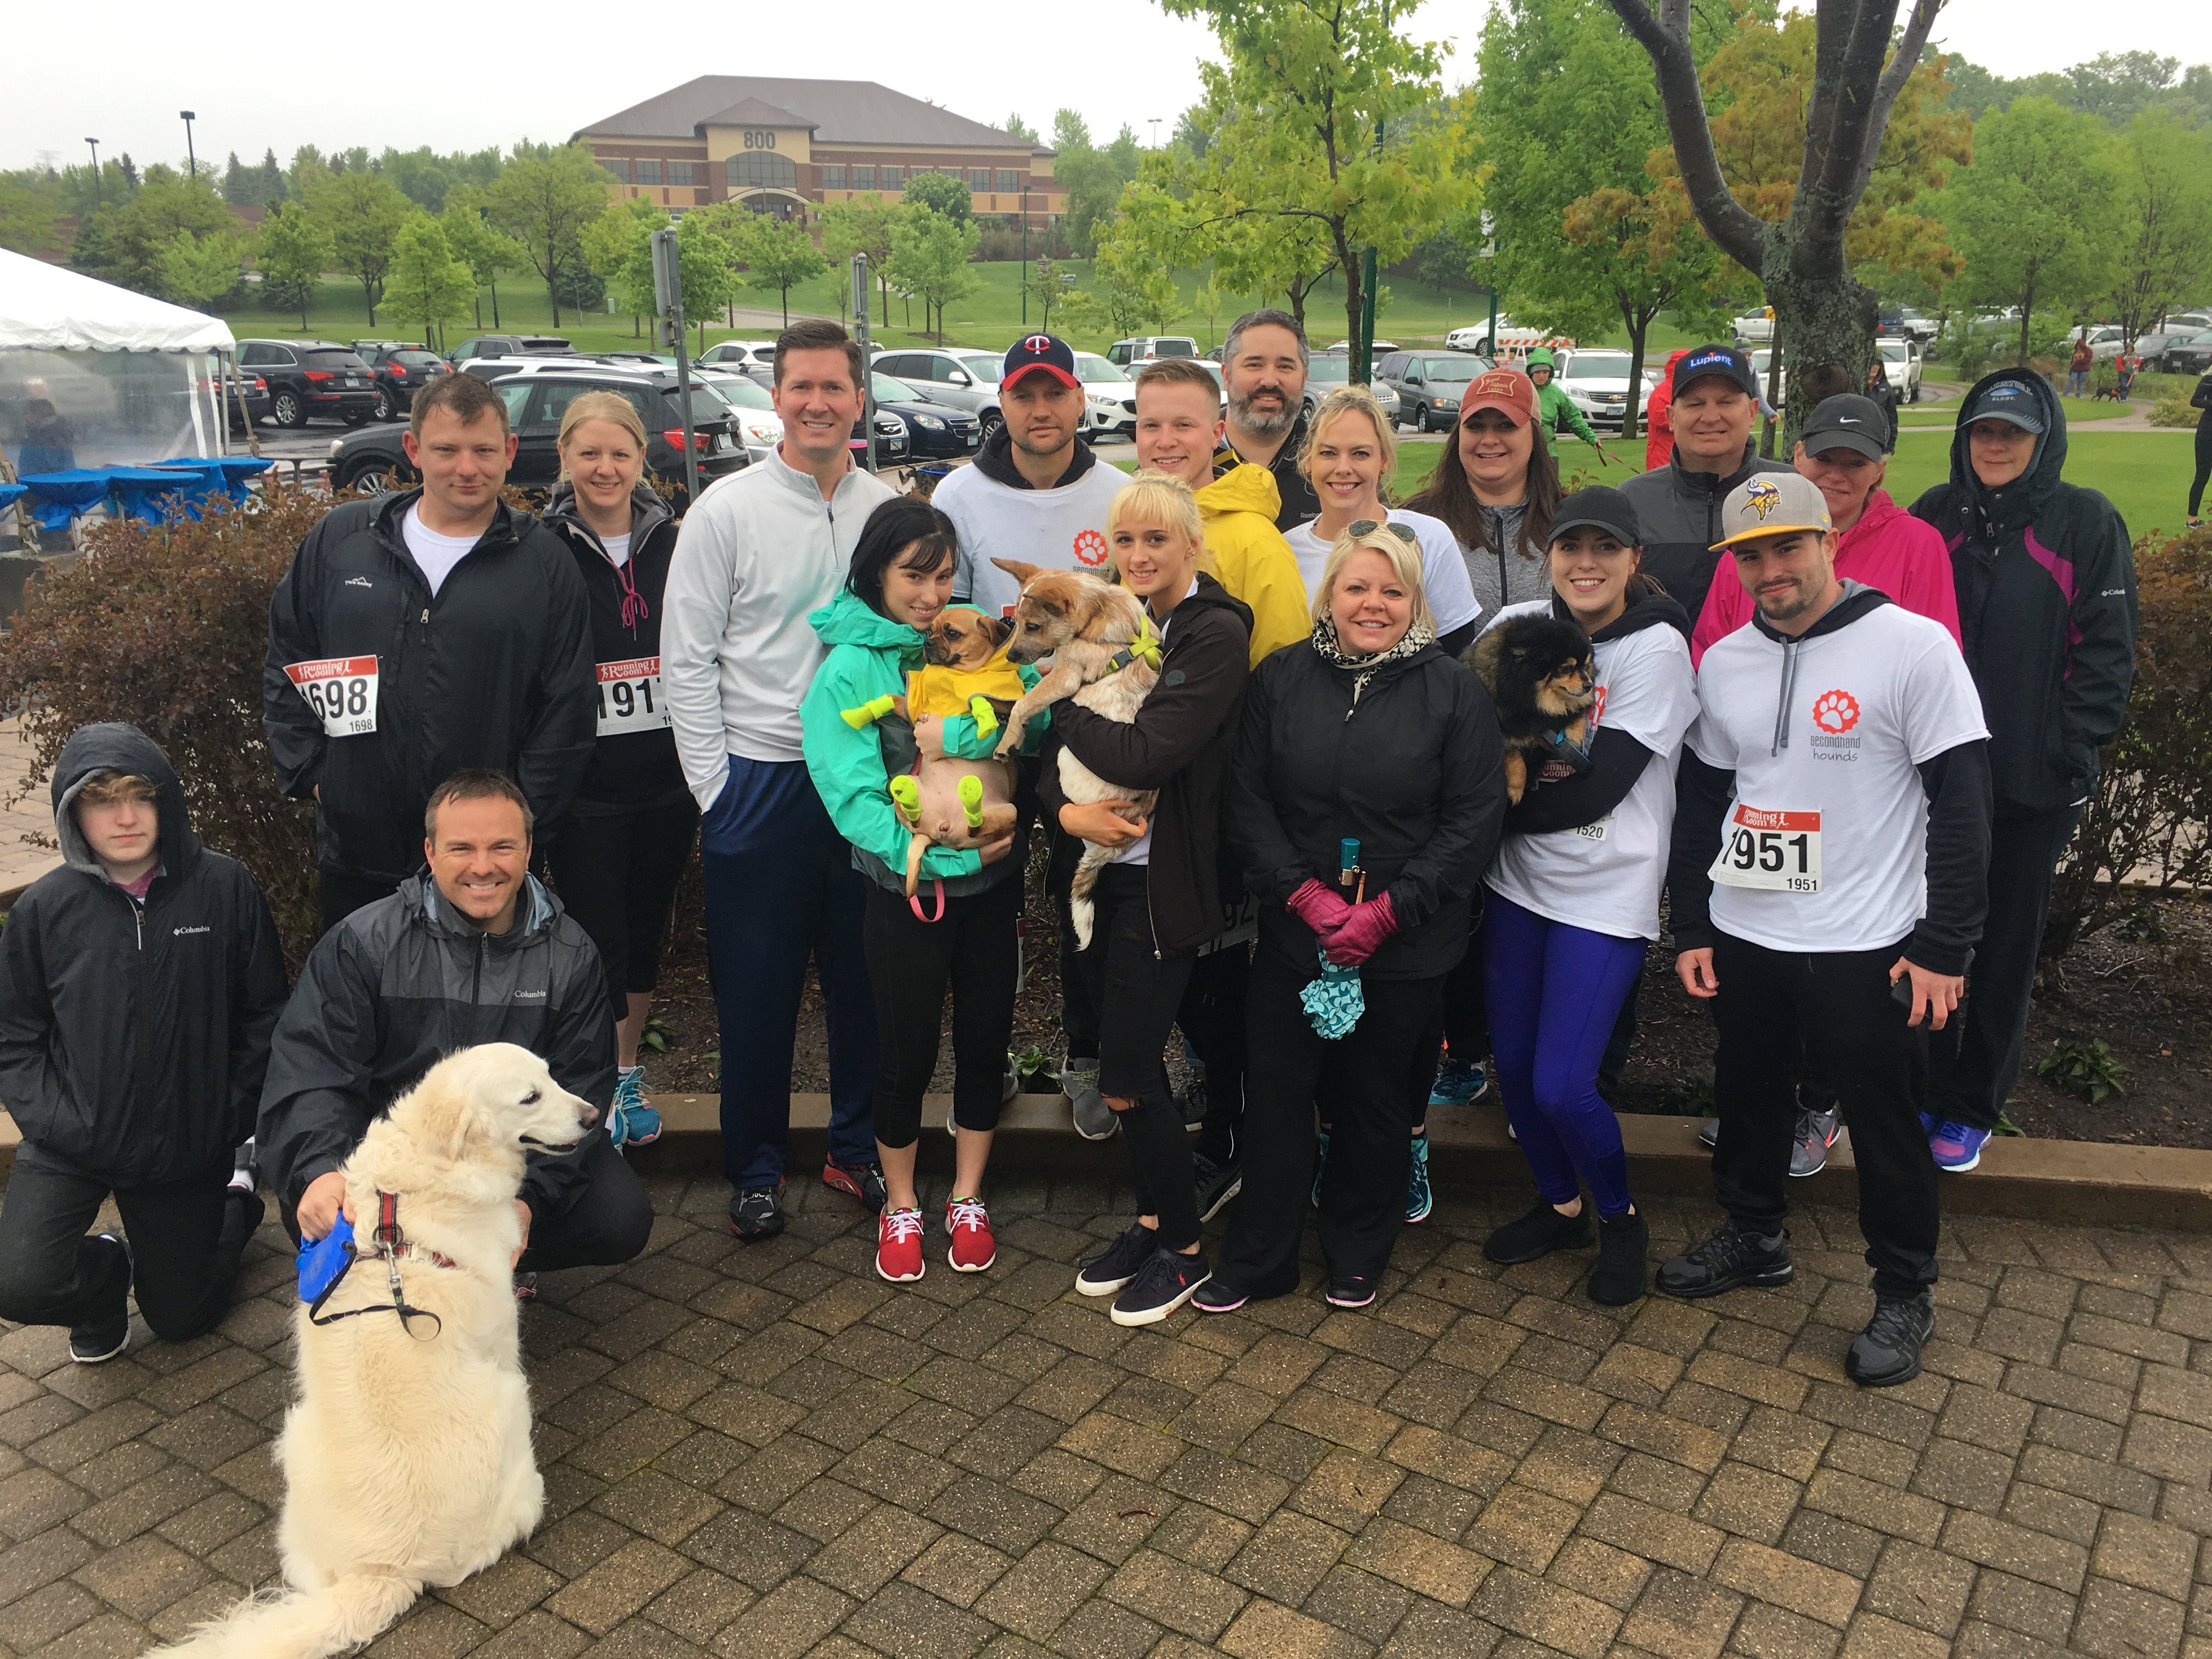 Lupient Automotive Group employees support Secondhand Hounds at the Strut for a Mutt 5k at Purgatory Park in Eden Prairie